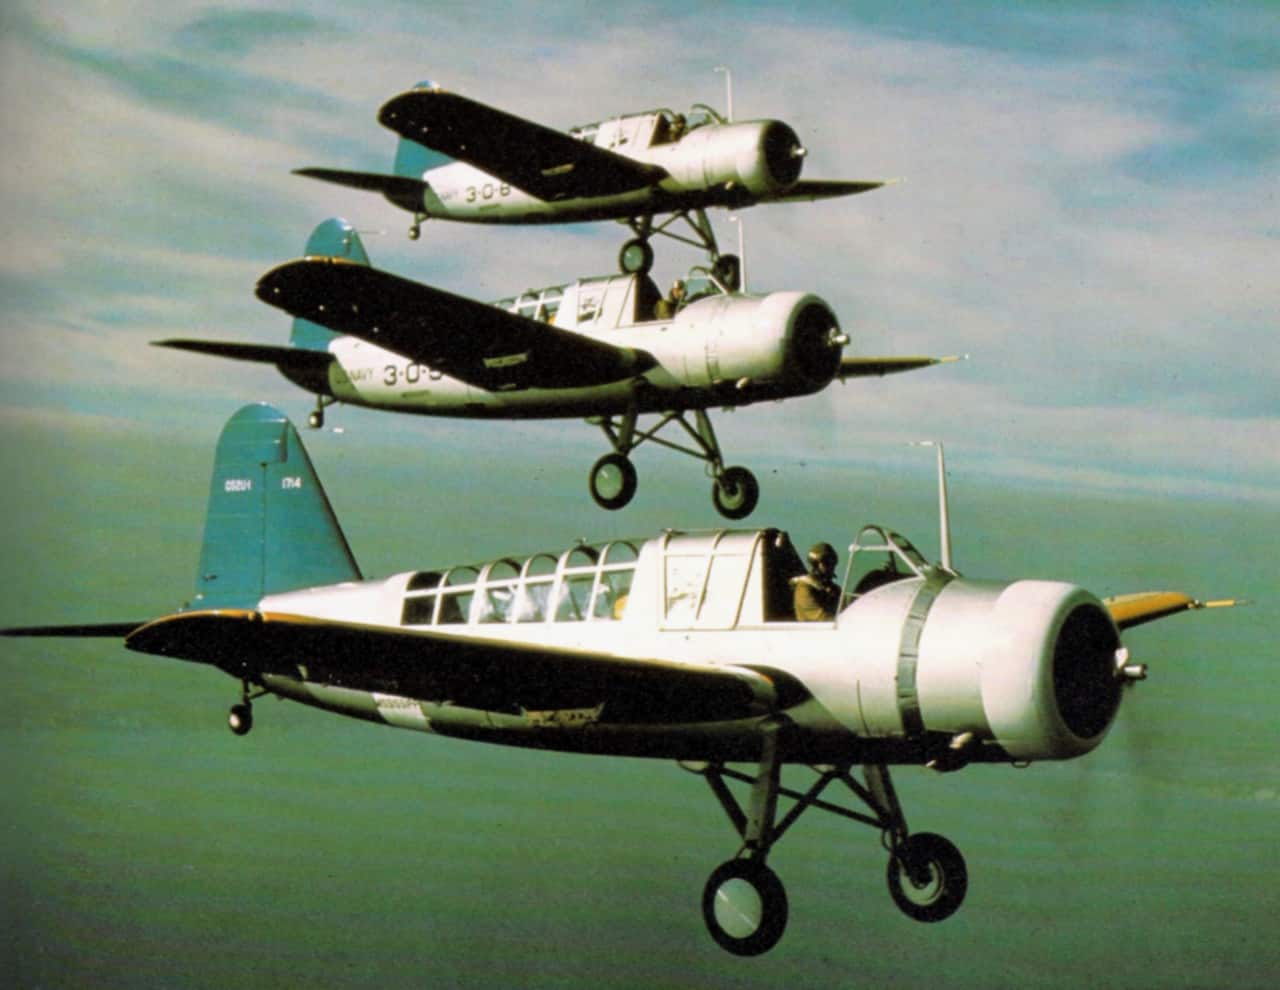 Vought Os2U Kingfisher Wallpapers